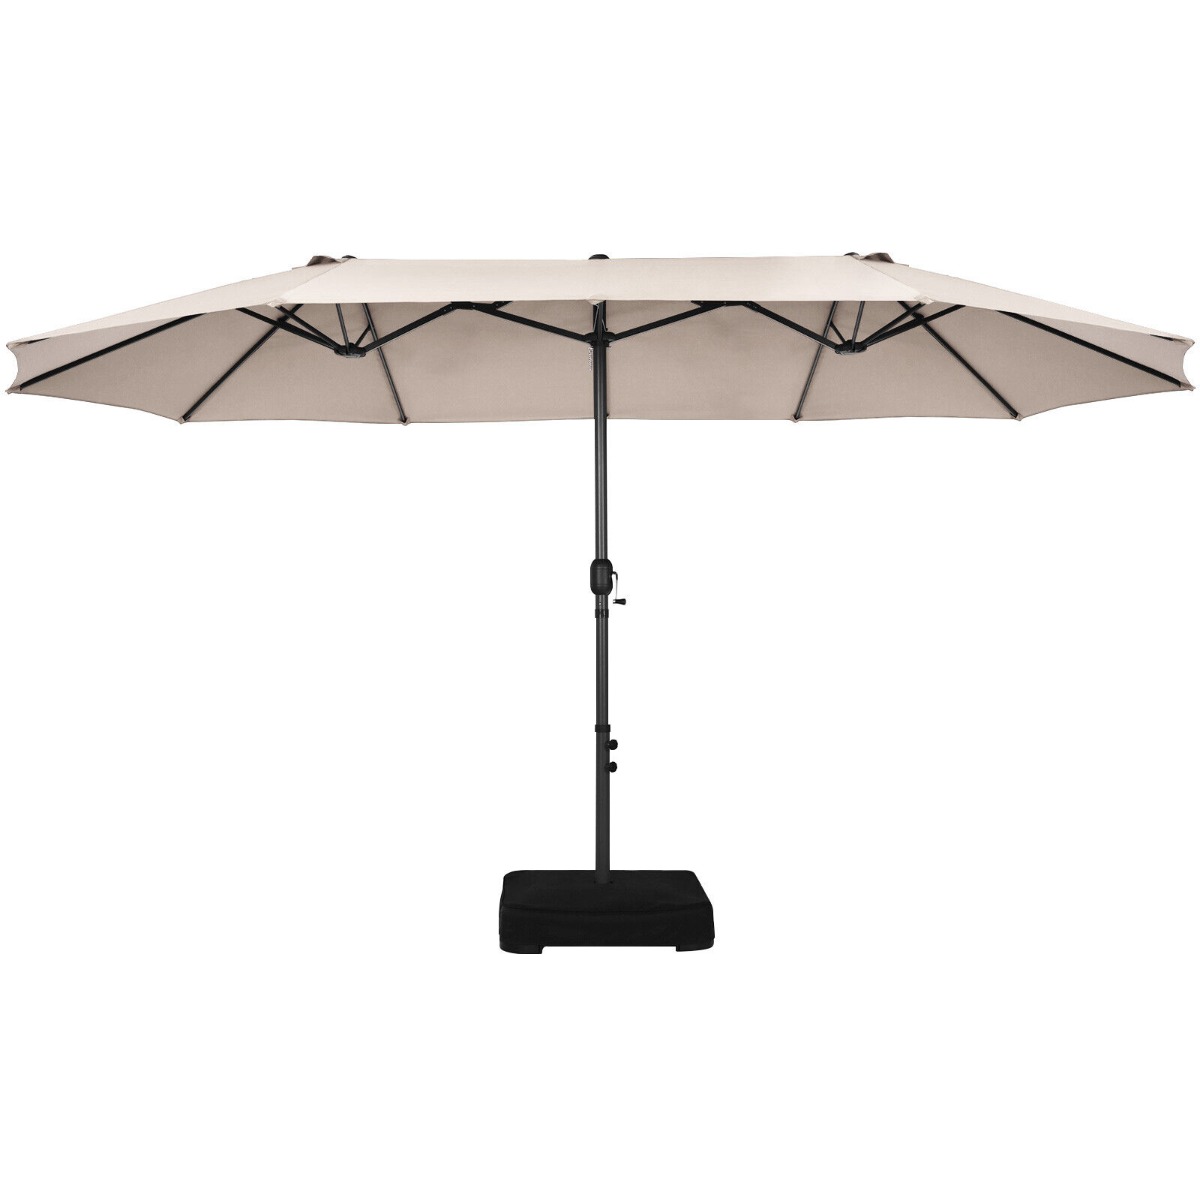 450CM Double Sided Outdoor Umbrella Twin Size with Crank Handle-Beige